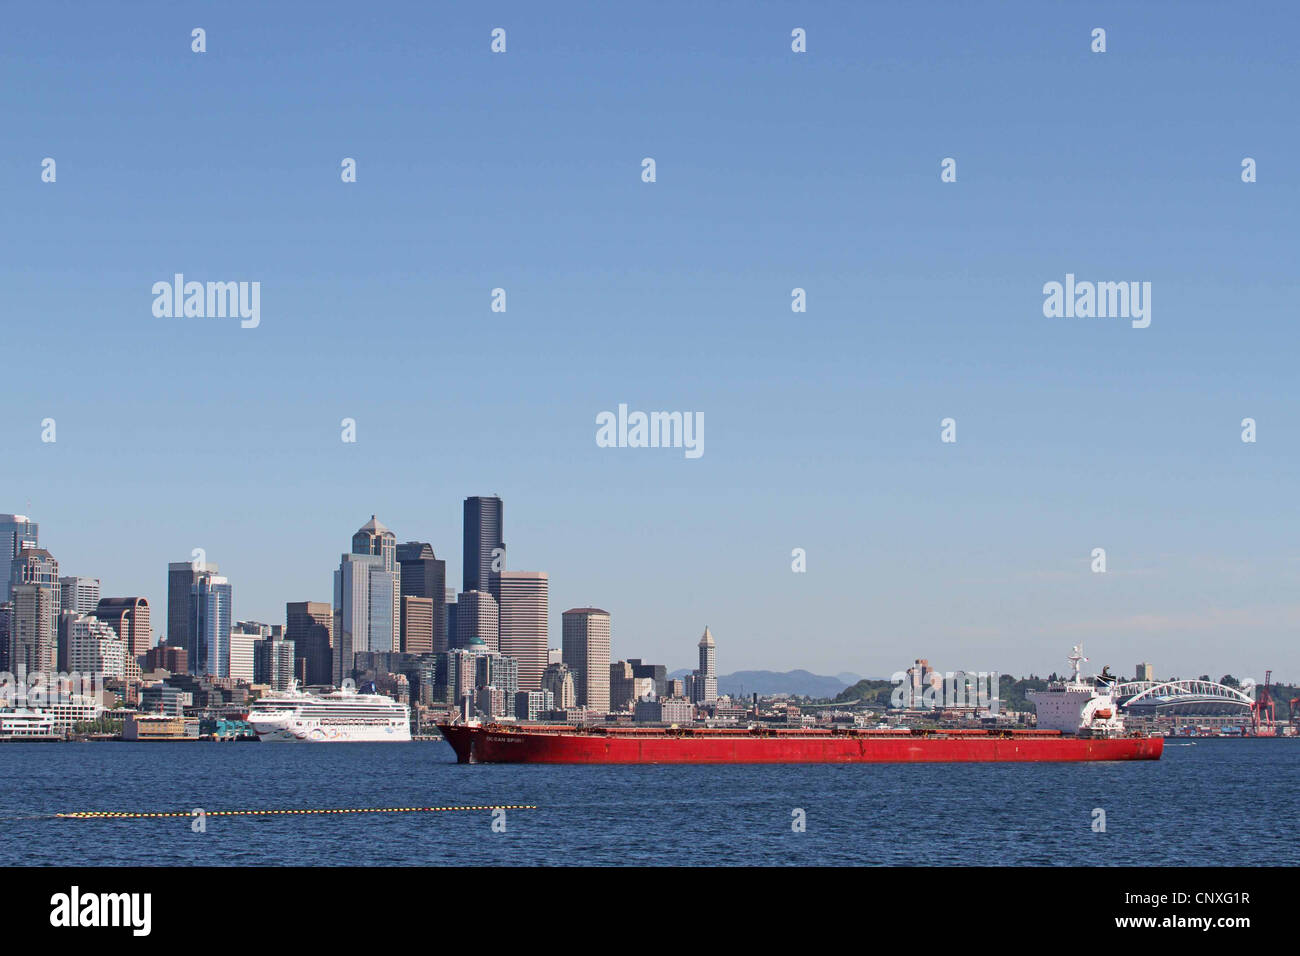 Red Tanker in the harbour, or harbor at Seattle Stock Photo